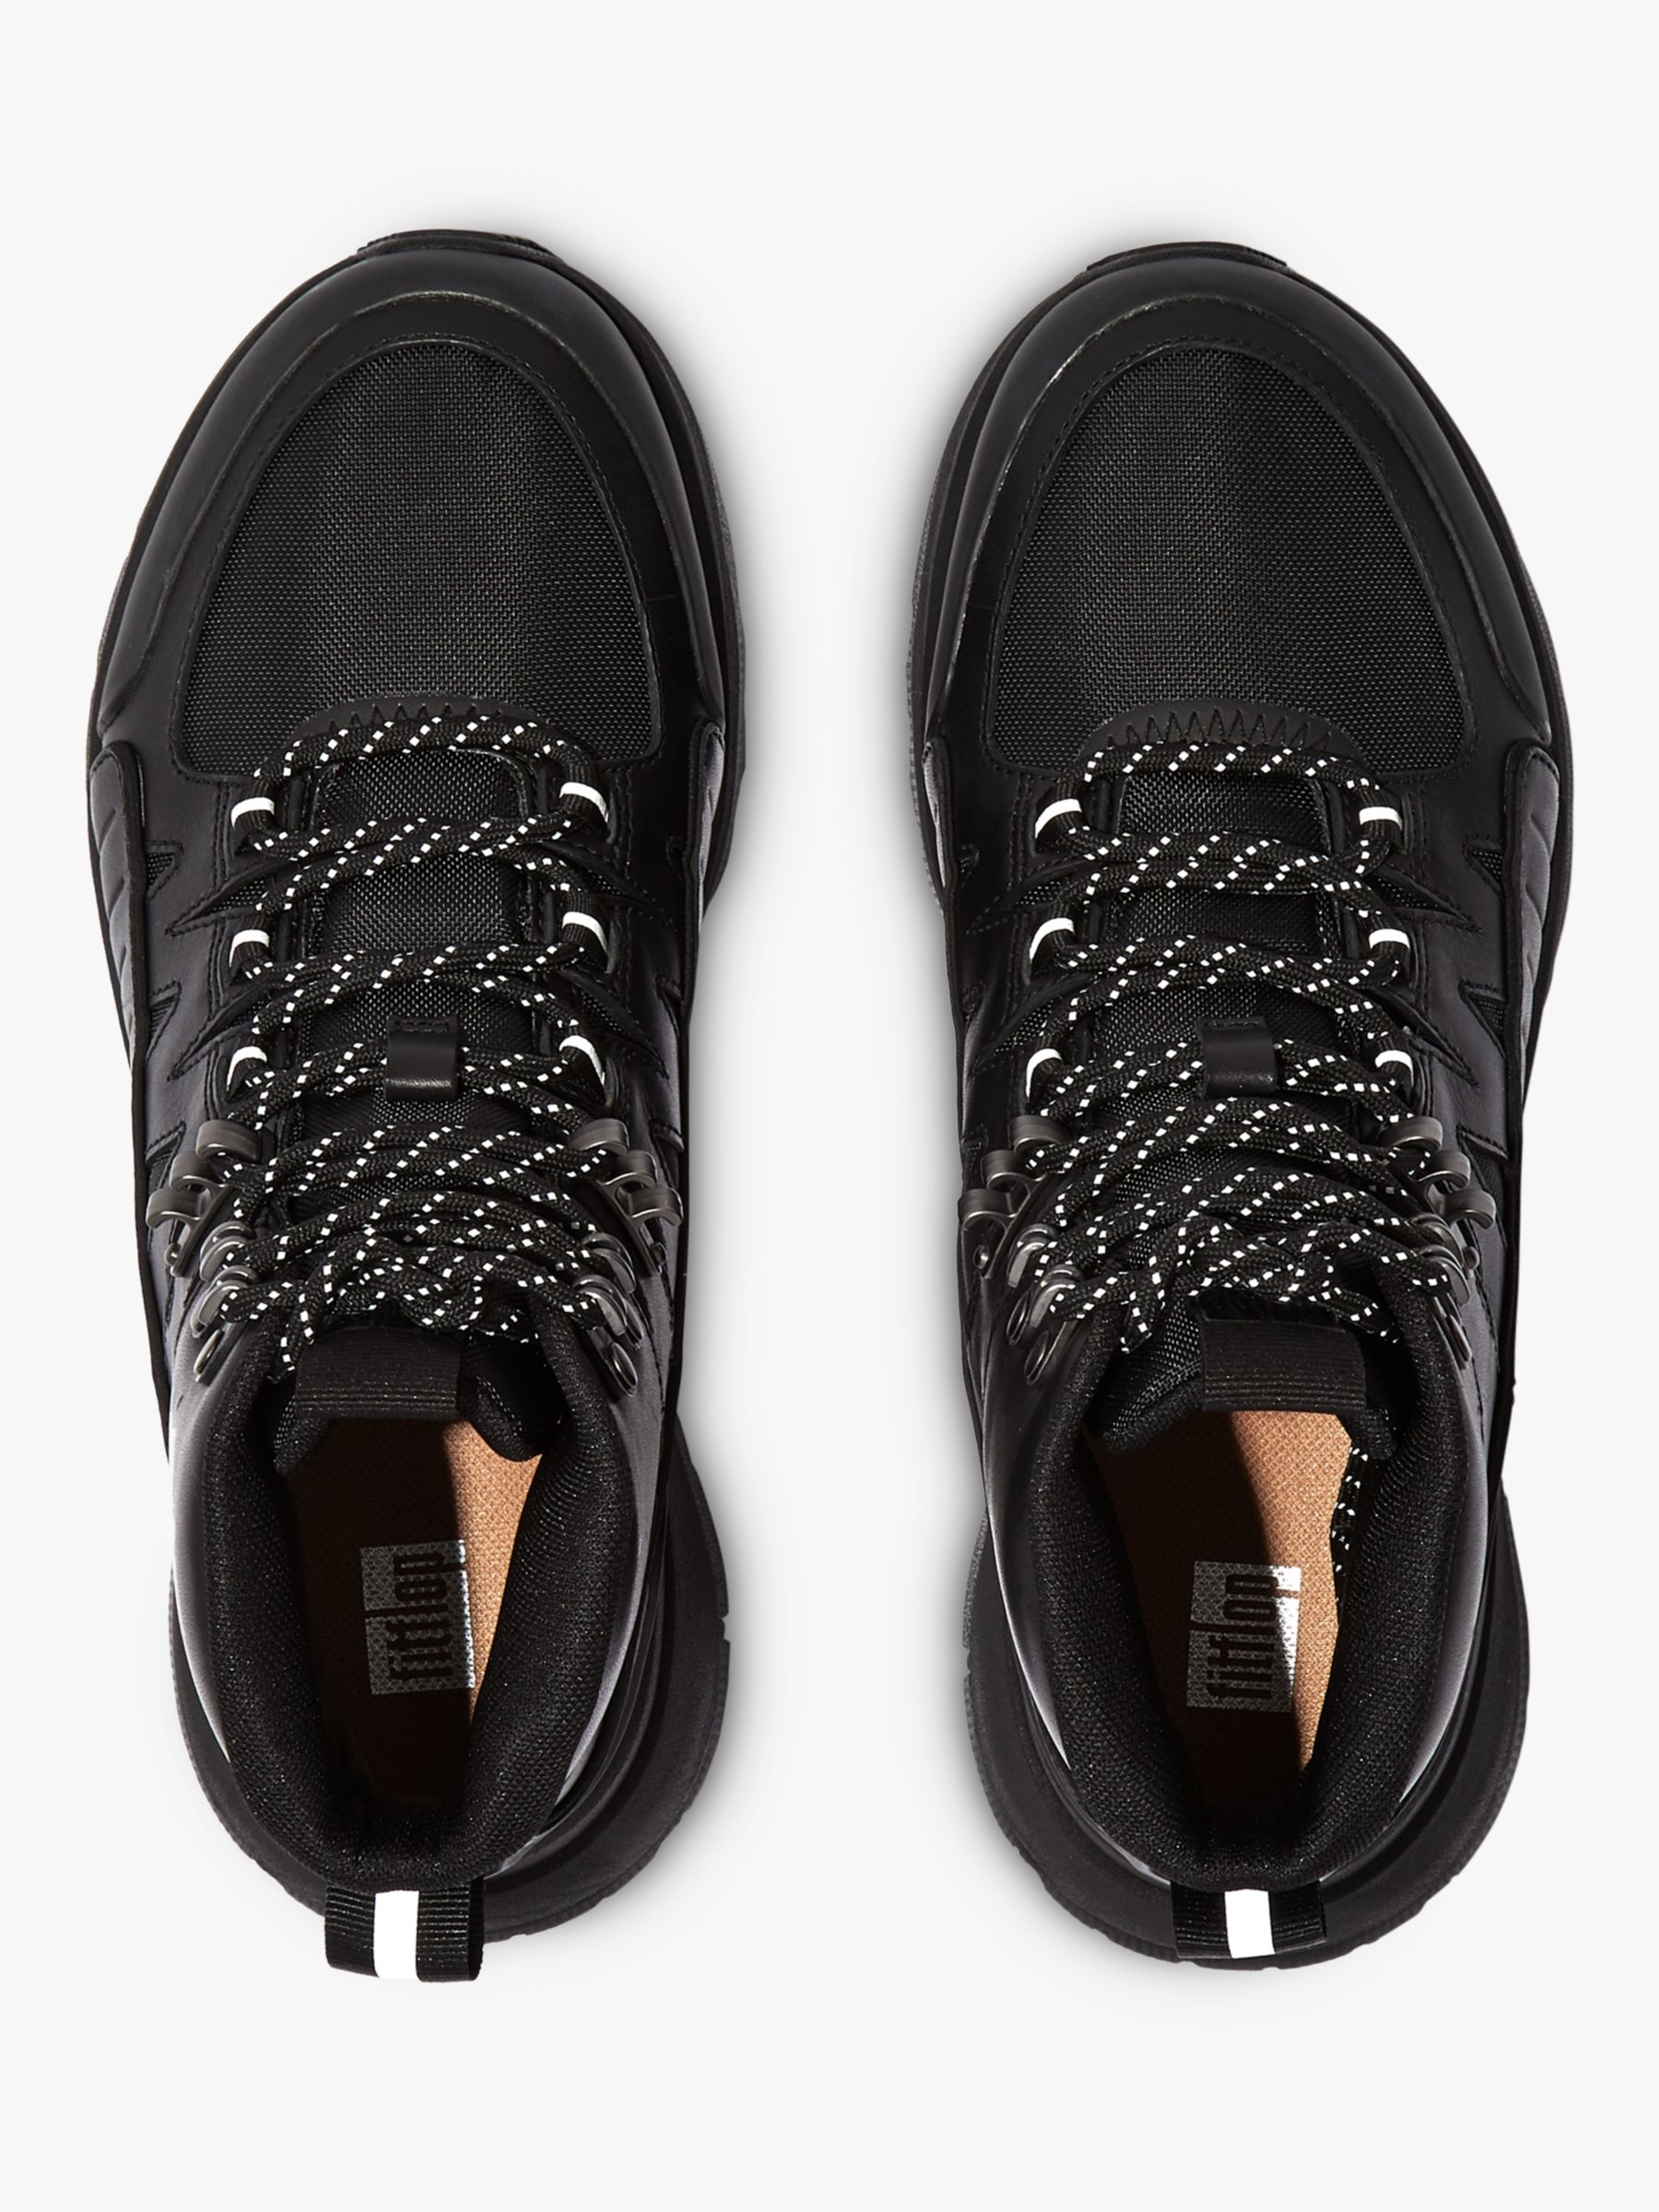 FitFlop Neo Leather Mix Hiking Shoes, Black at John Lewis & Partners